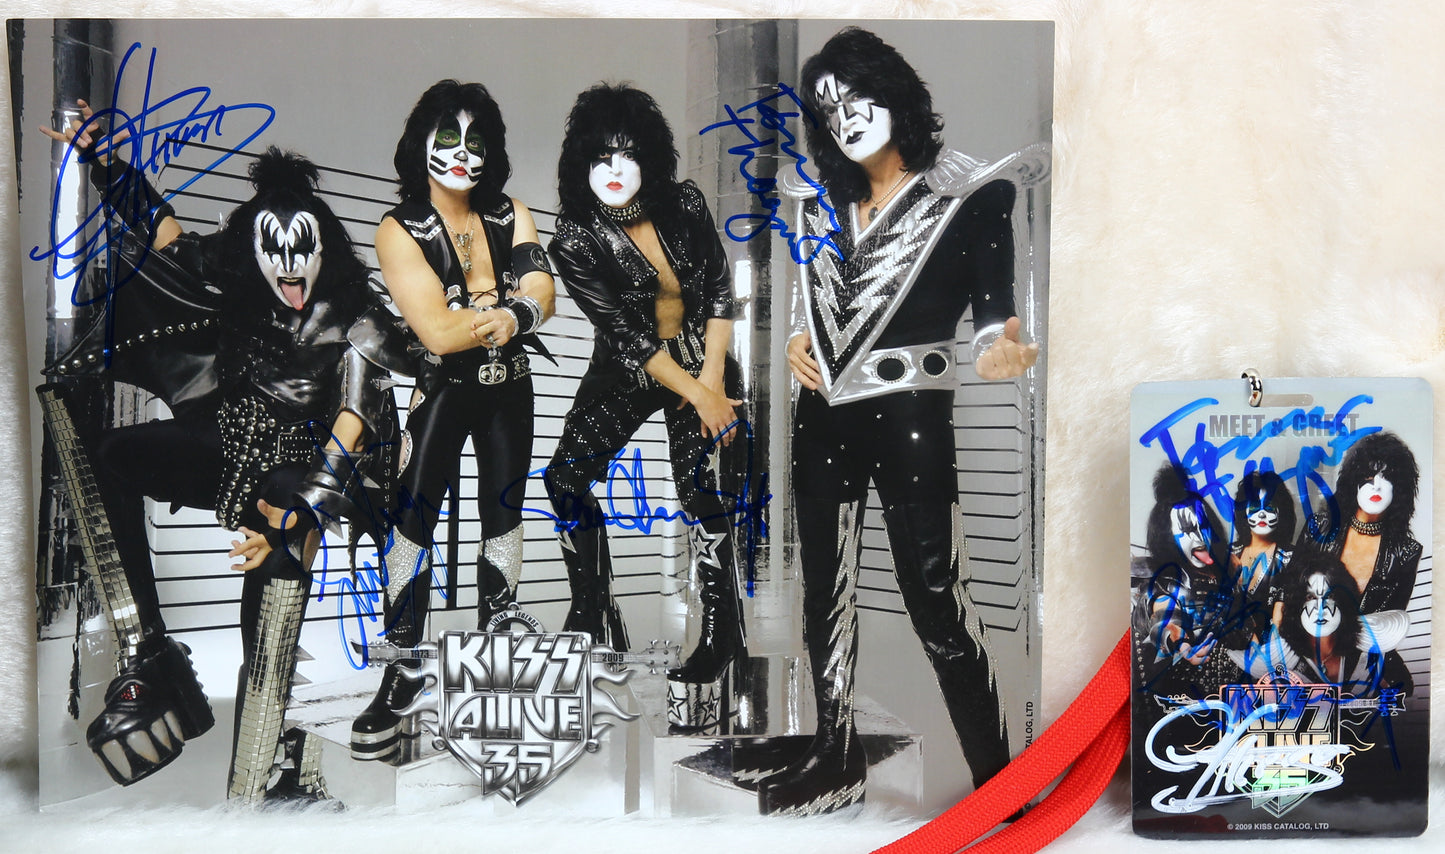 SIGNED BY KISS! 2009 Gibson '76 Reissue Explorer - Paul Stanley, Gene Simmons, Tommy Thayer, Eric Singer Autographs - Kiss Alive 35 Tour!